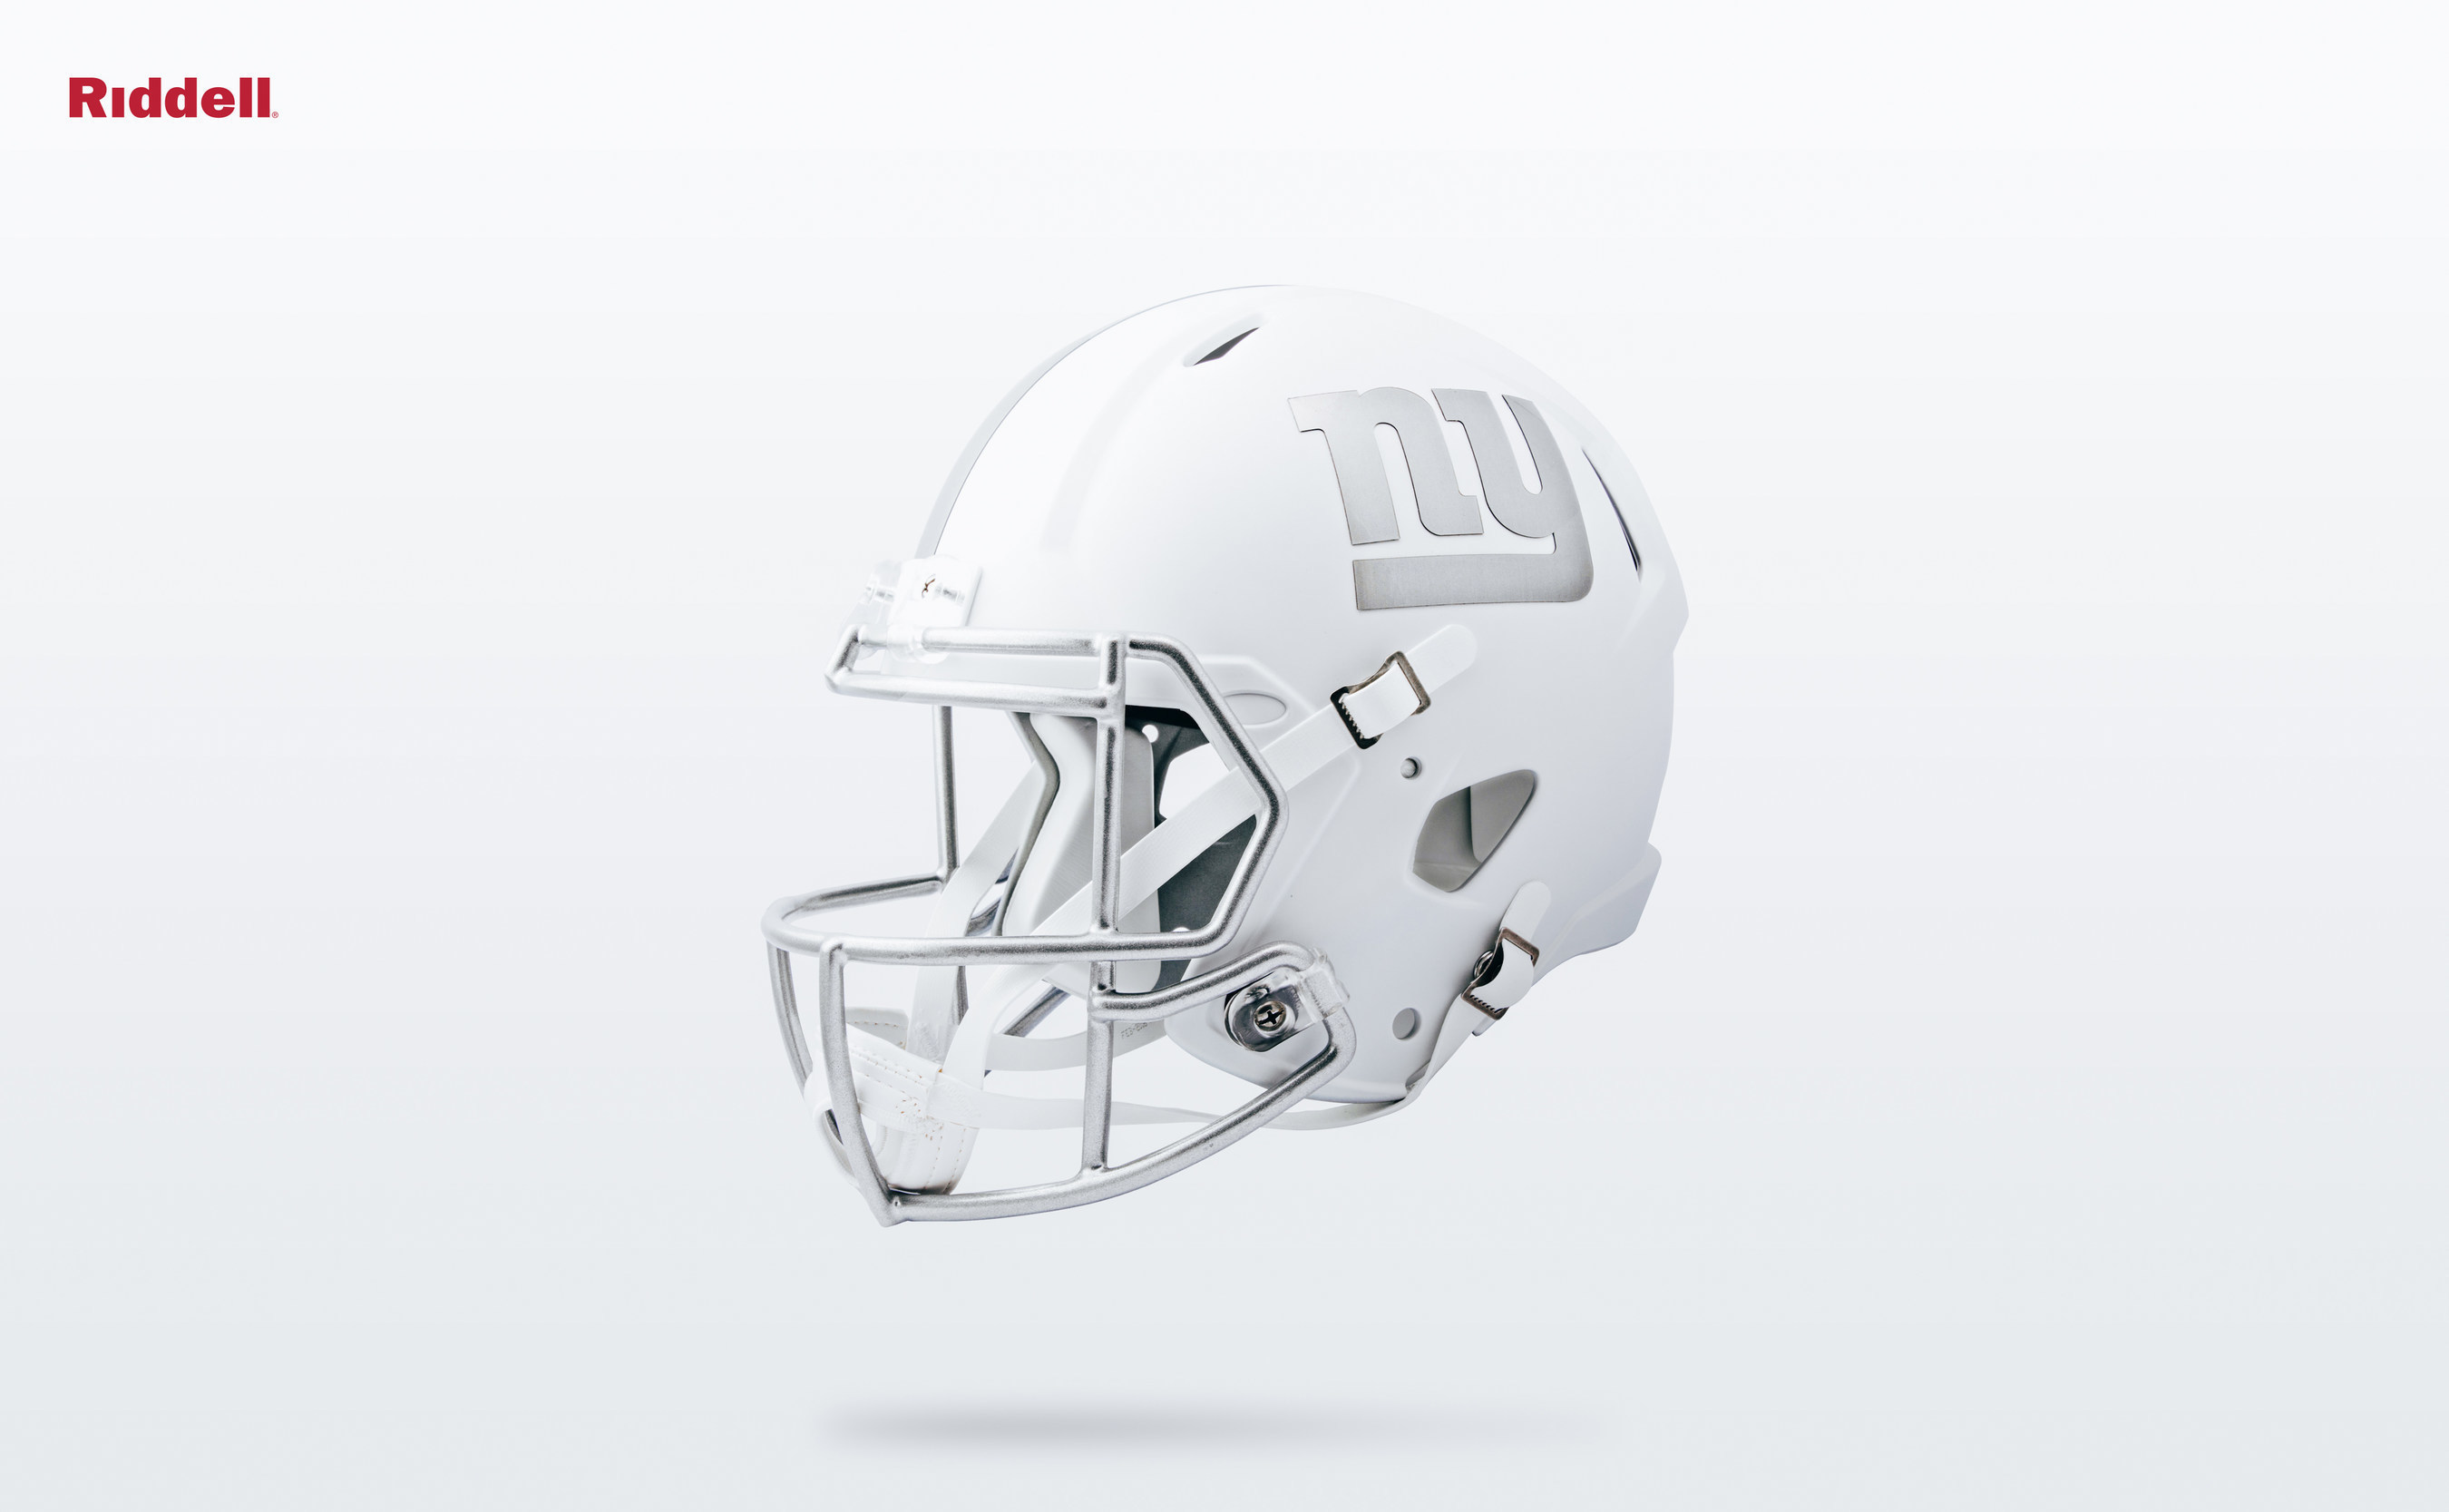 Riddell Introduces ICE Alternate Helmet Collection